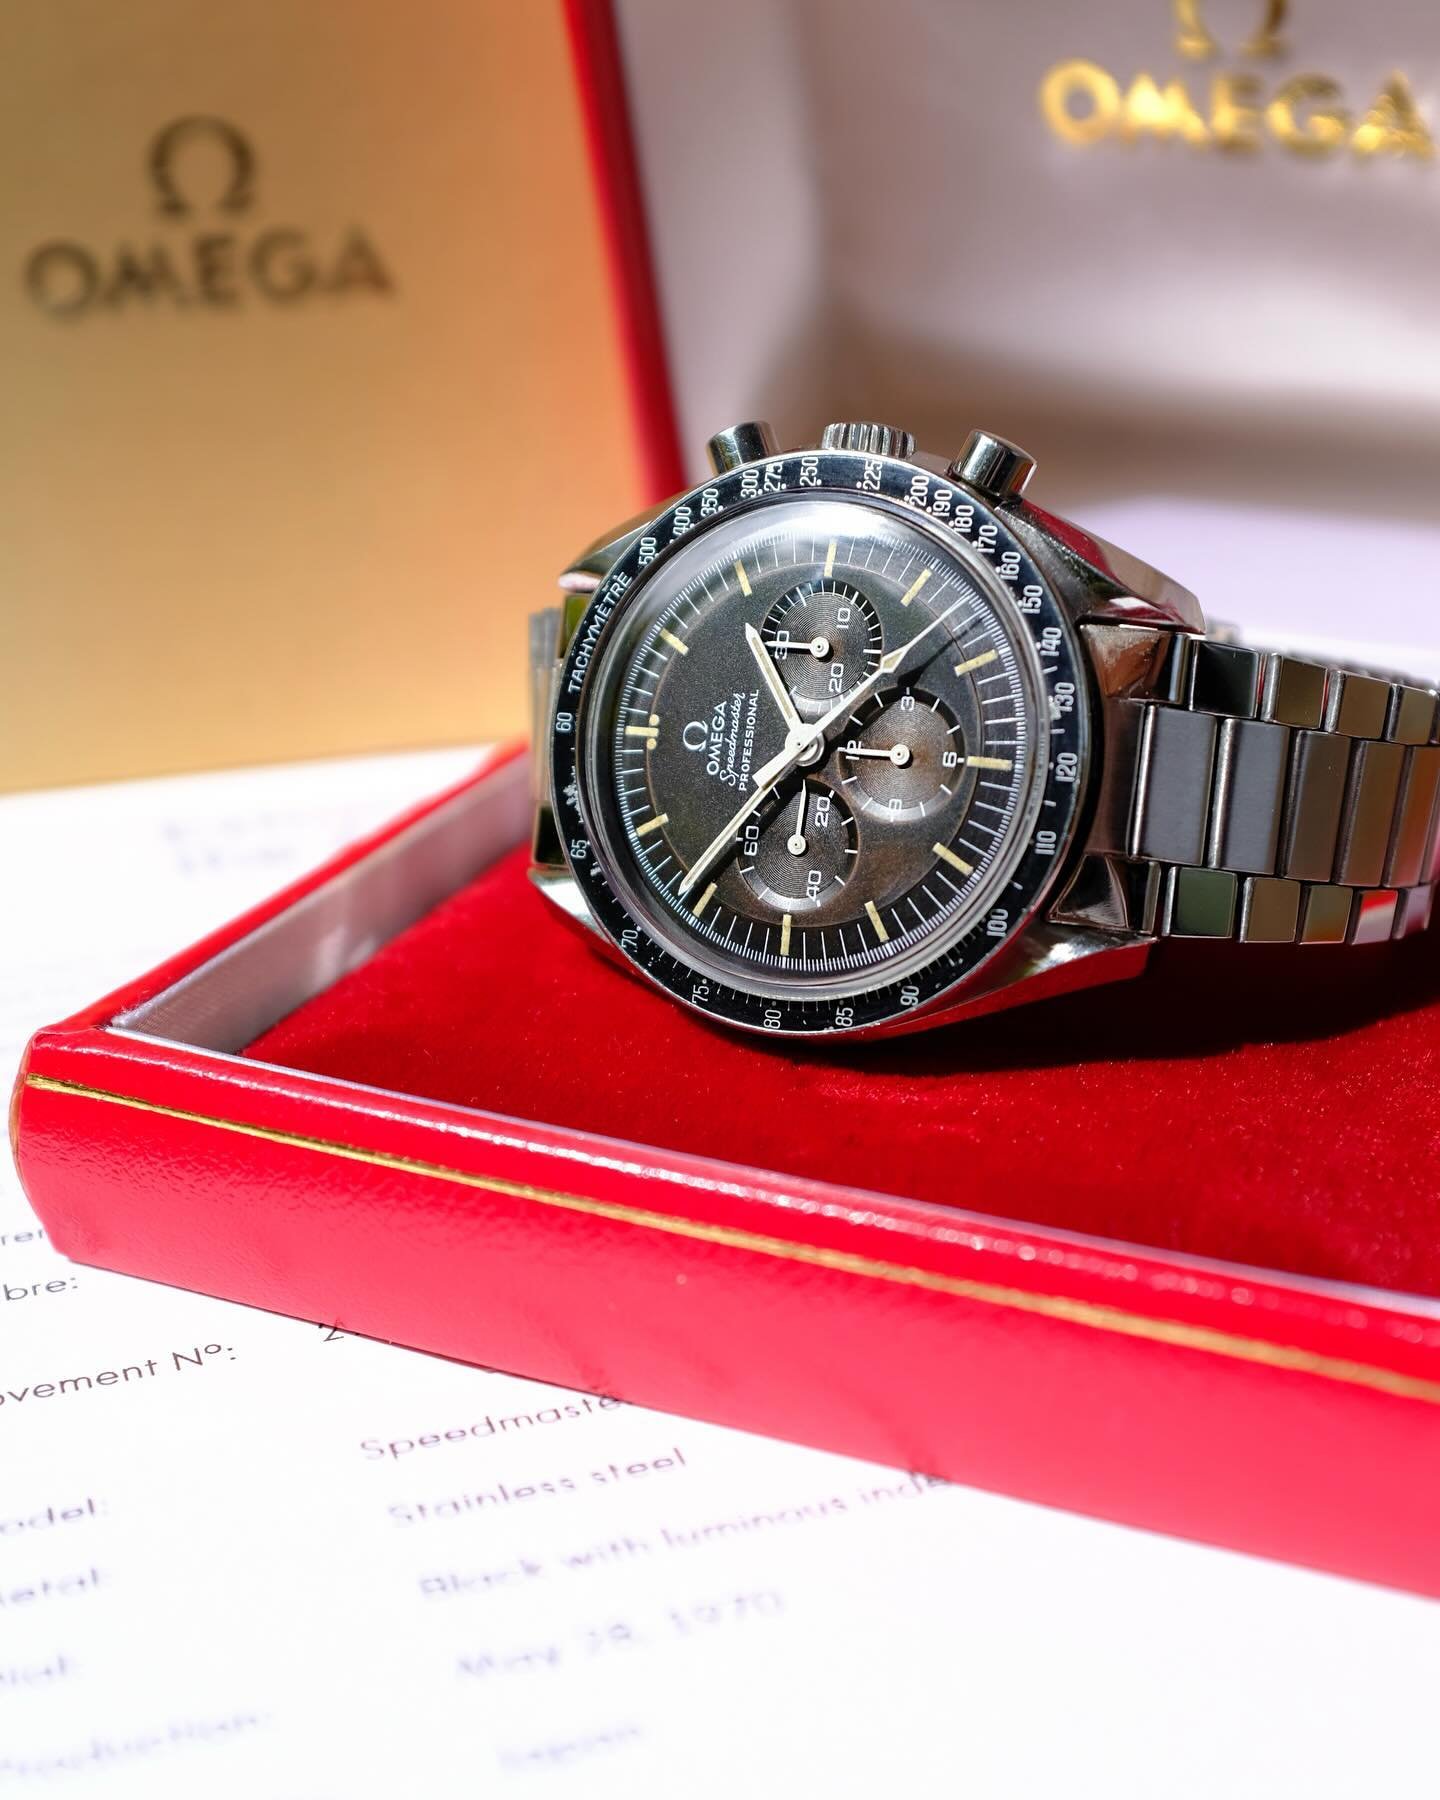 Your favorite watch to wear on a Tuesday, but with a faded brown dial. 

-Omega Speedmaster 145.022-69ST tropical dial with box &amp; extract. Produced 5.28.70 and originally delivered to Japan. 

#speedytuesday